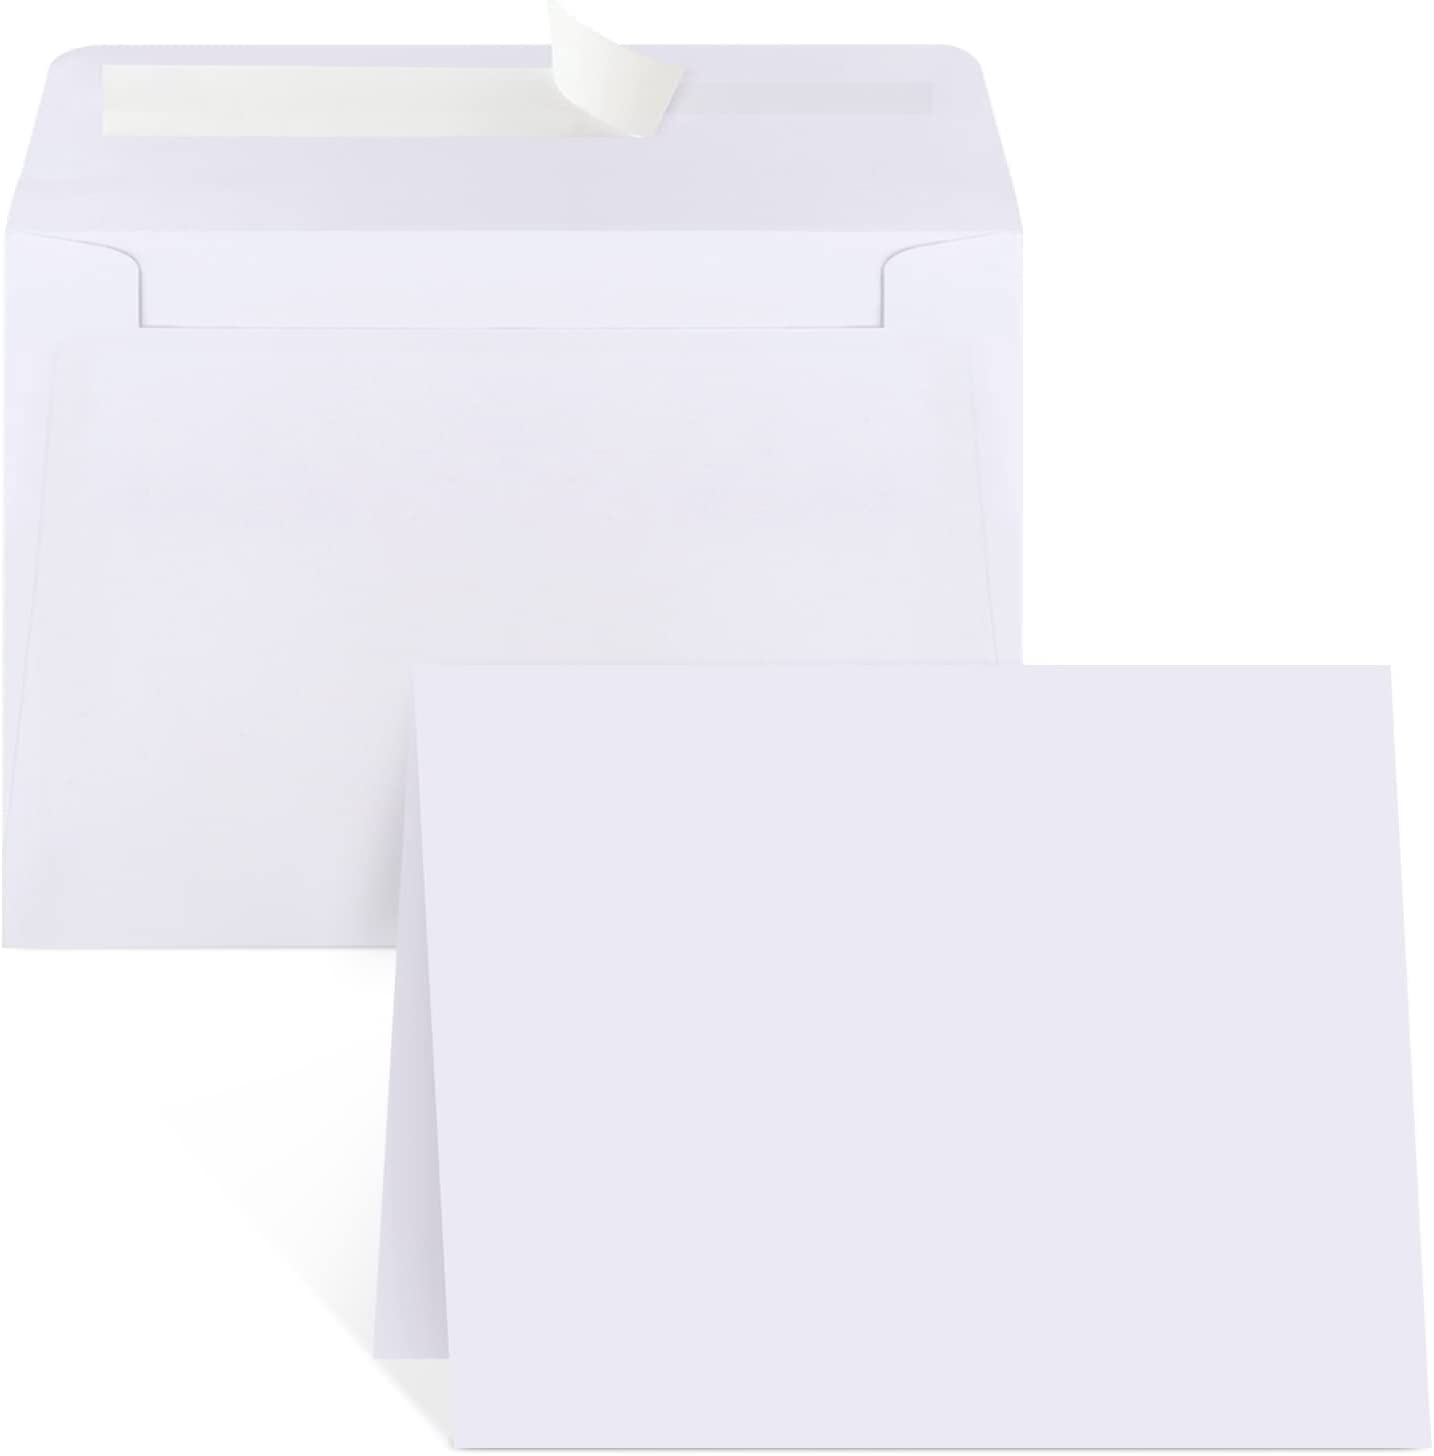 50 Pack Blank White Cards with Envelopes 4x6 Inch Folded Greeting Cards